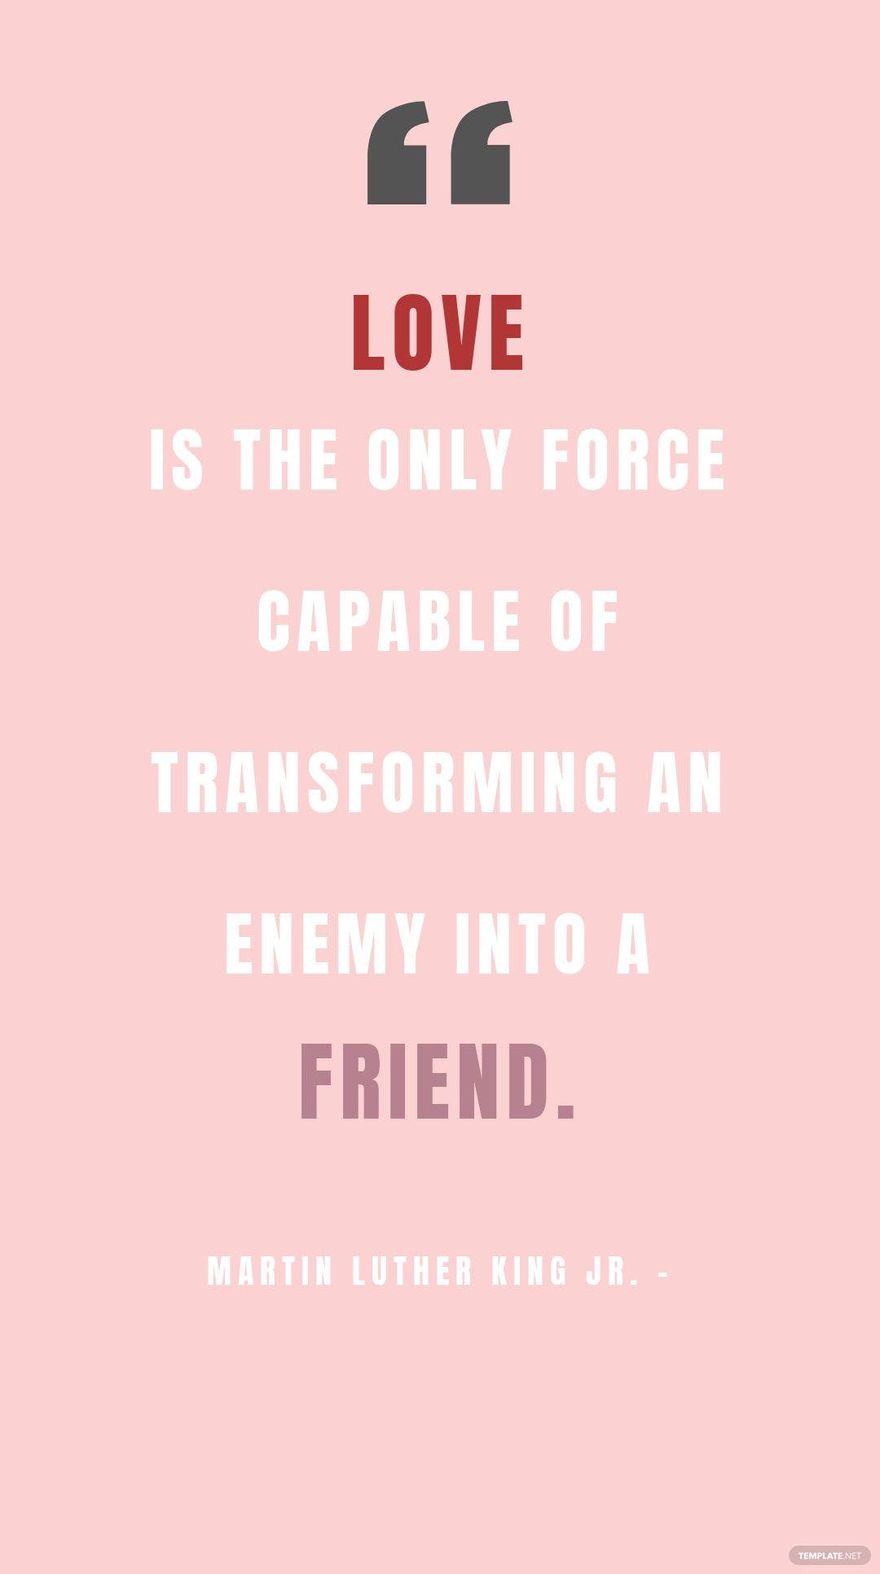 Martin Luther King Jr. - Love is the only force capable of transforming an enemy into a friend.